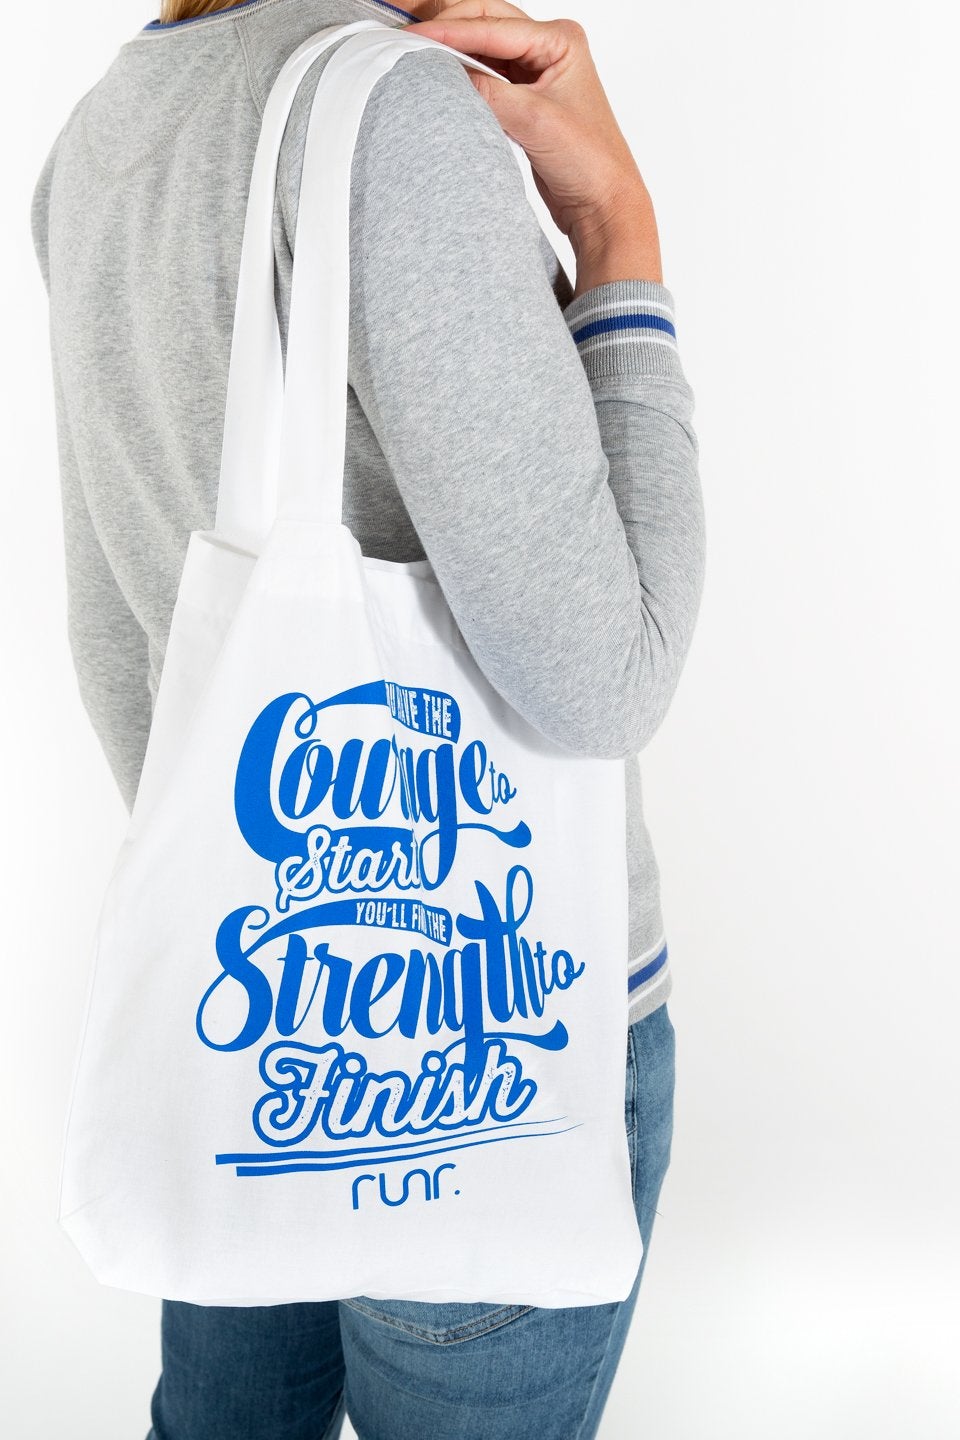 Courage To Start Tote Bag White/Blue